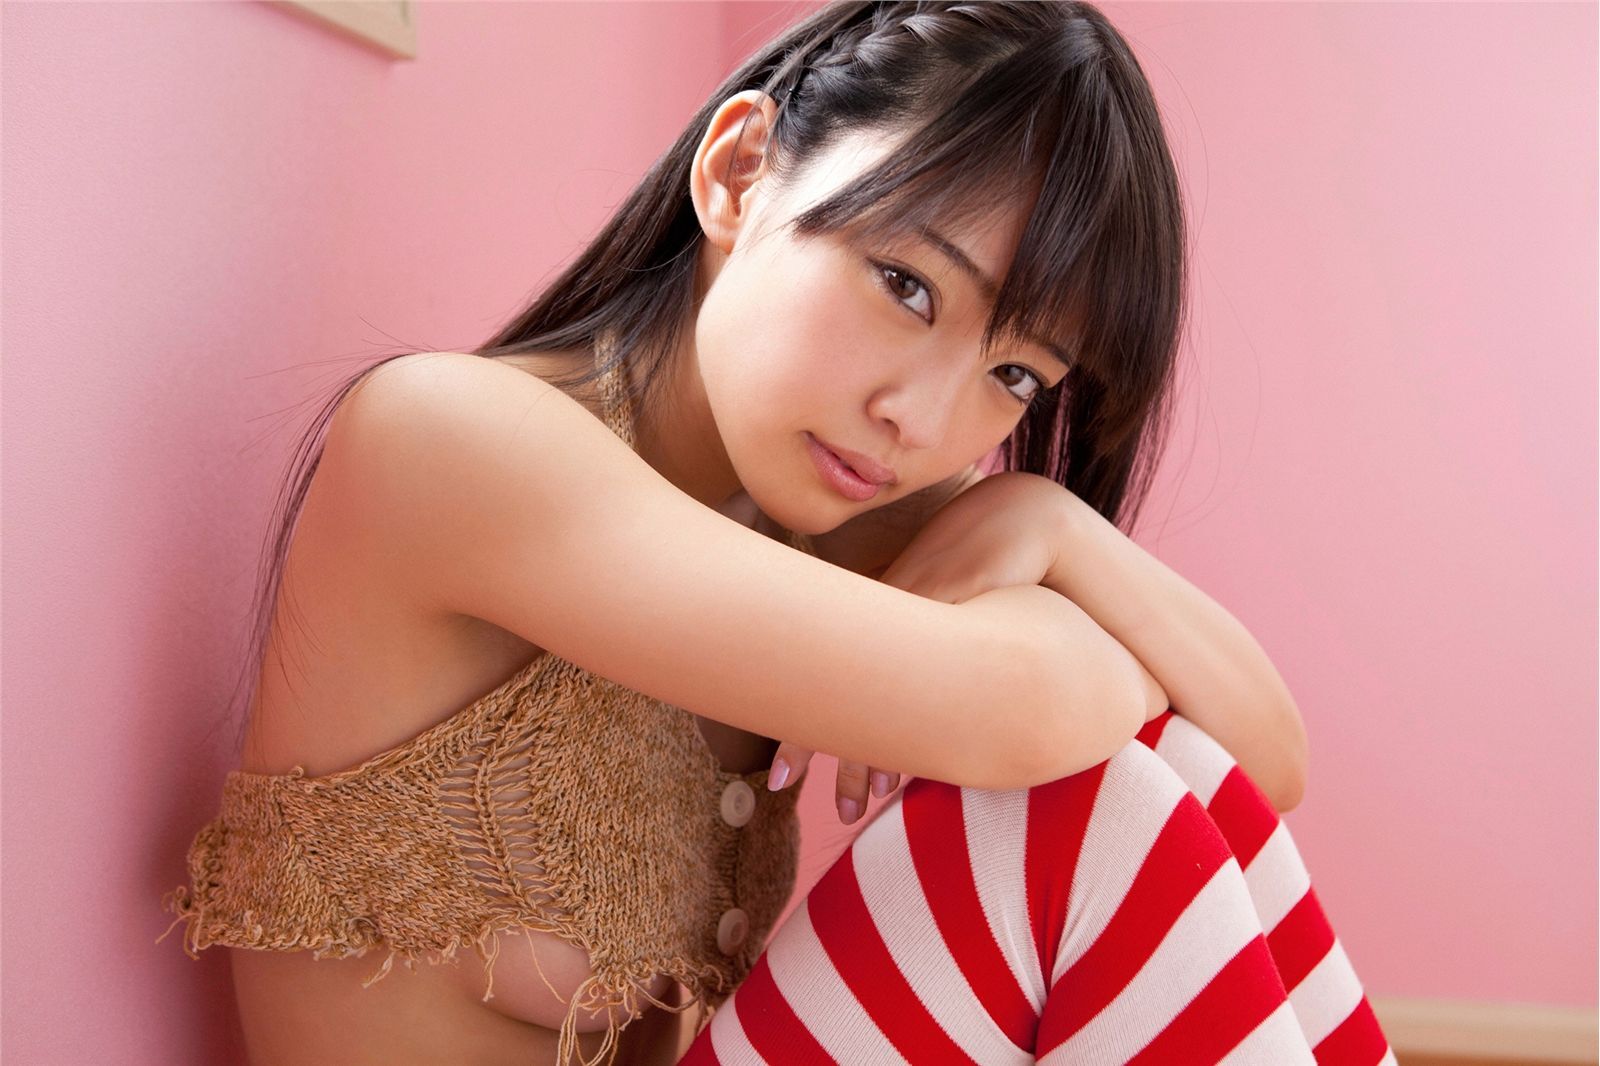 Ando yaoxia [ys-web] 2012.04.04 vol.477 pictures of sexy Japanese beauties